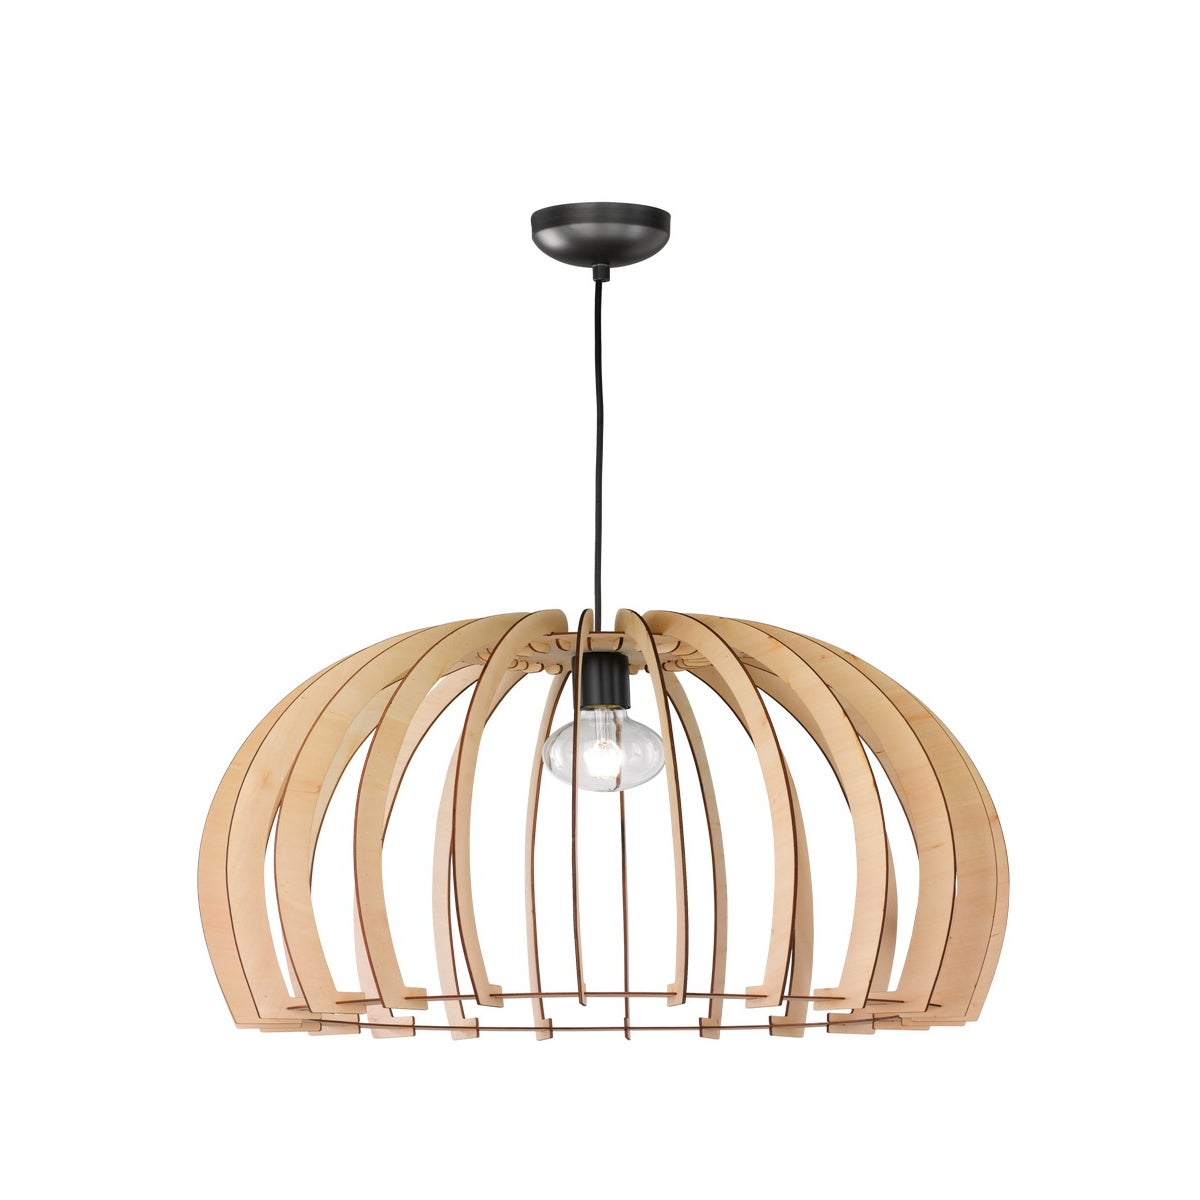 ArnsbergerLicht - Wood Shade | Wood with Pendant Large Color Inc deals Dome in